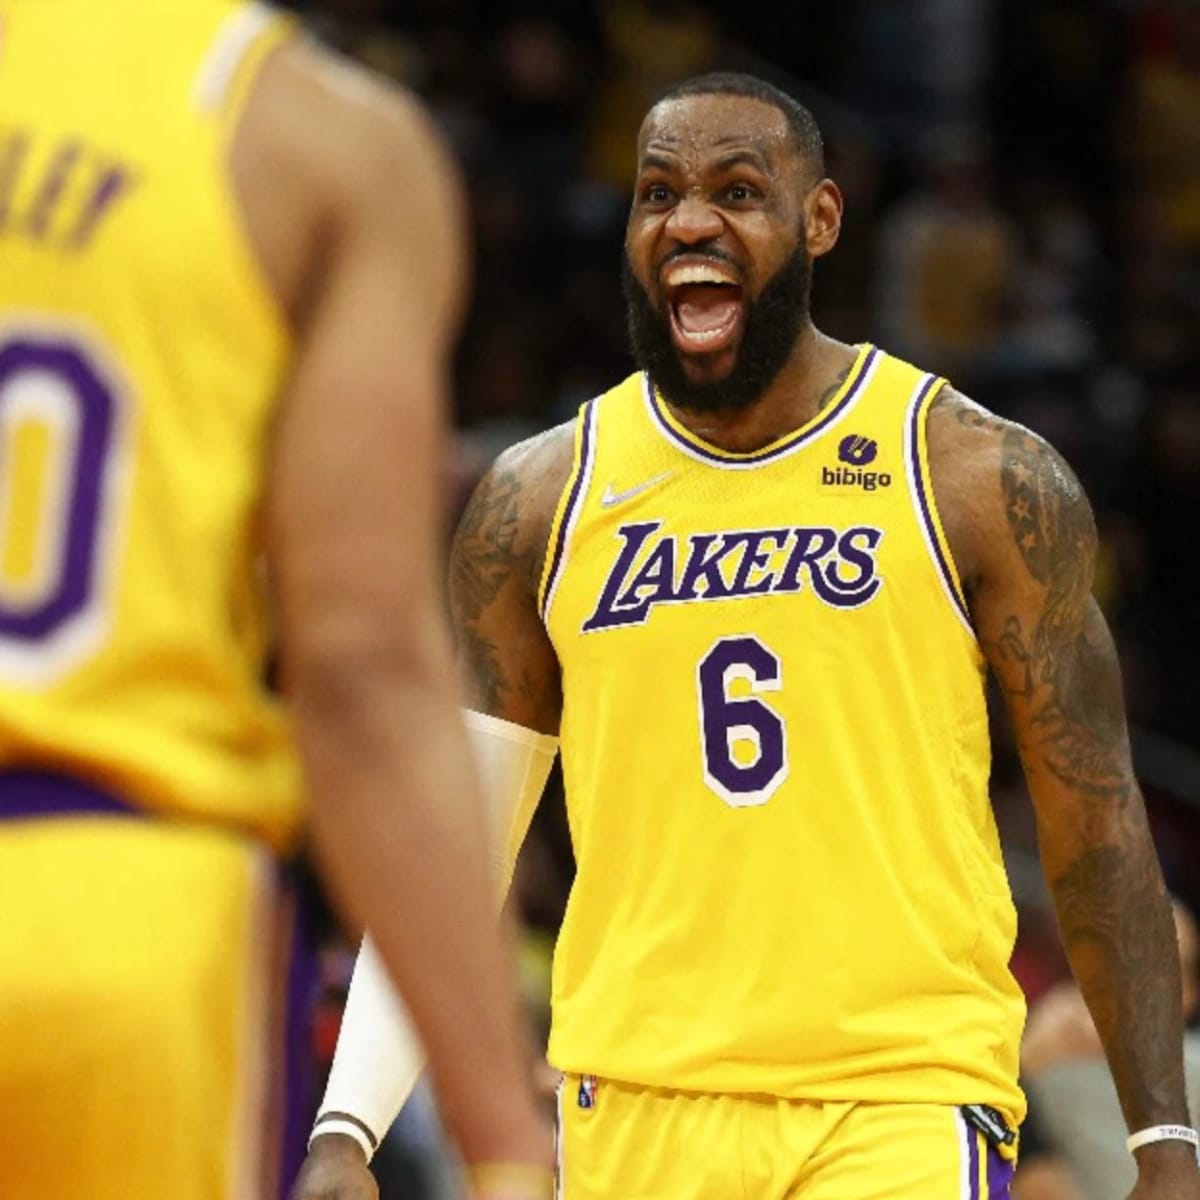 Lakers: LeBron James Breaks an NBA Record That May Never Be Passed